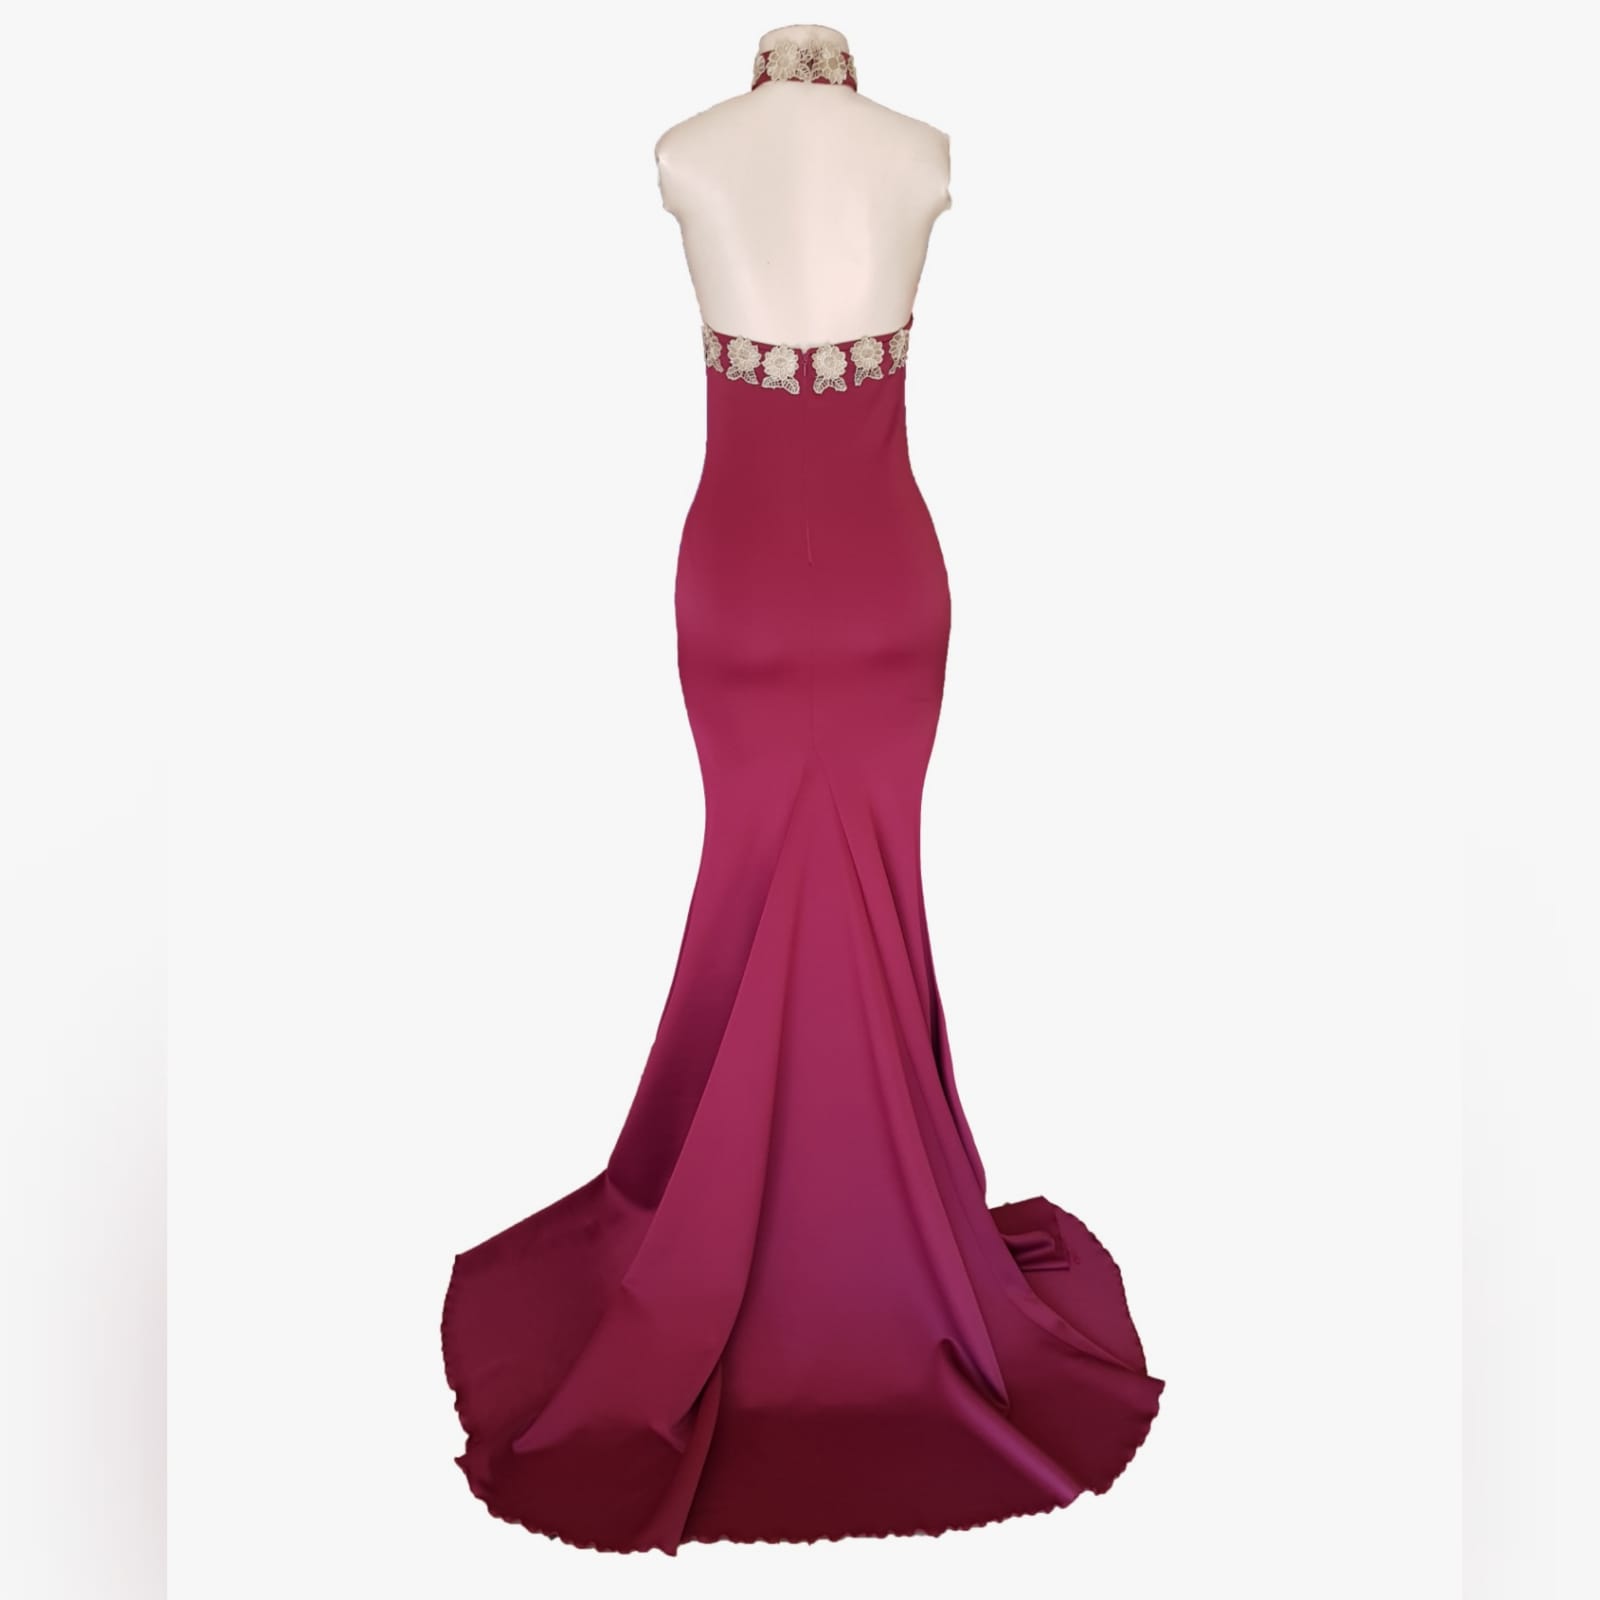 Burgundy and gold soft mermaid gala dress 3 burgundy and gold soft mermaid gala dress for a formal function. Boobtube with a v neckline, high slit and a train. Bodice detailed with gold shimmer lace. With a matching choker.